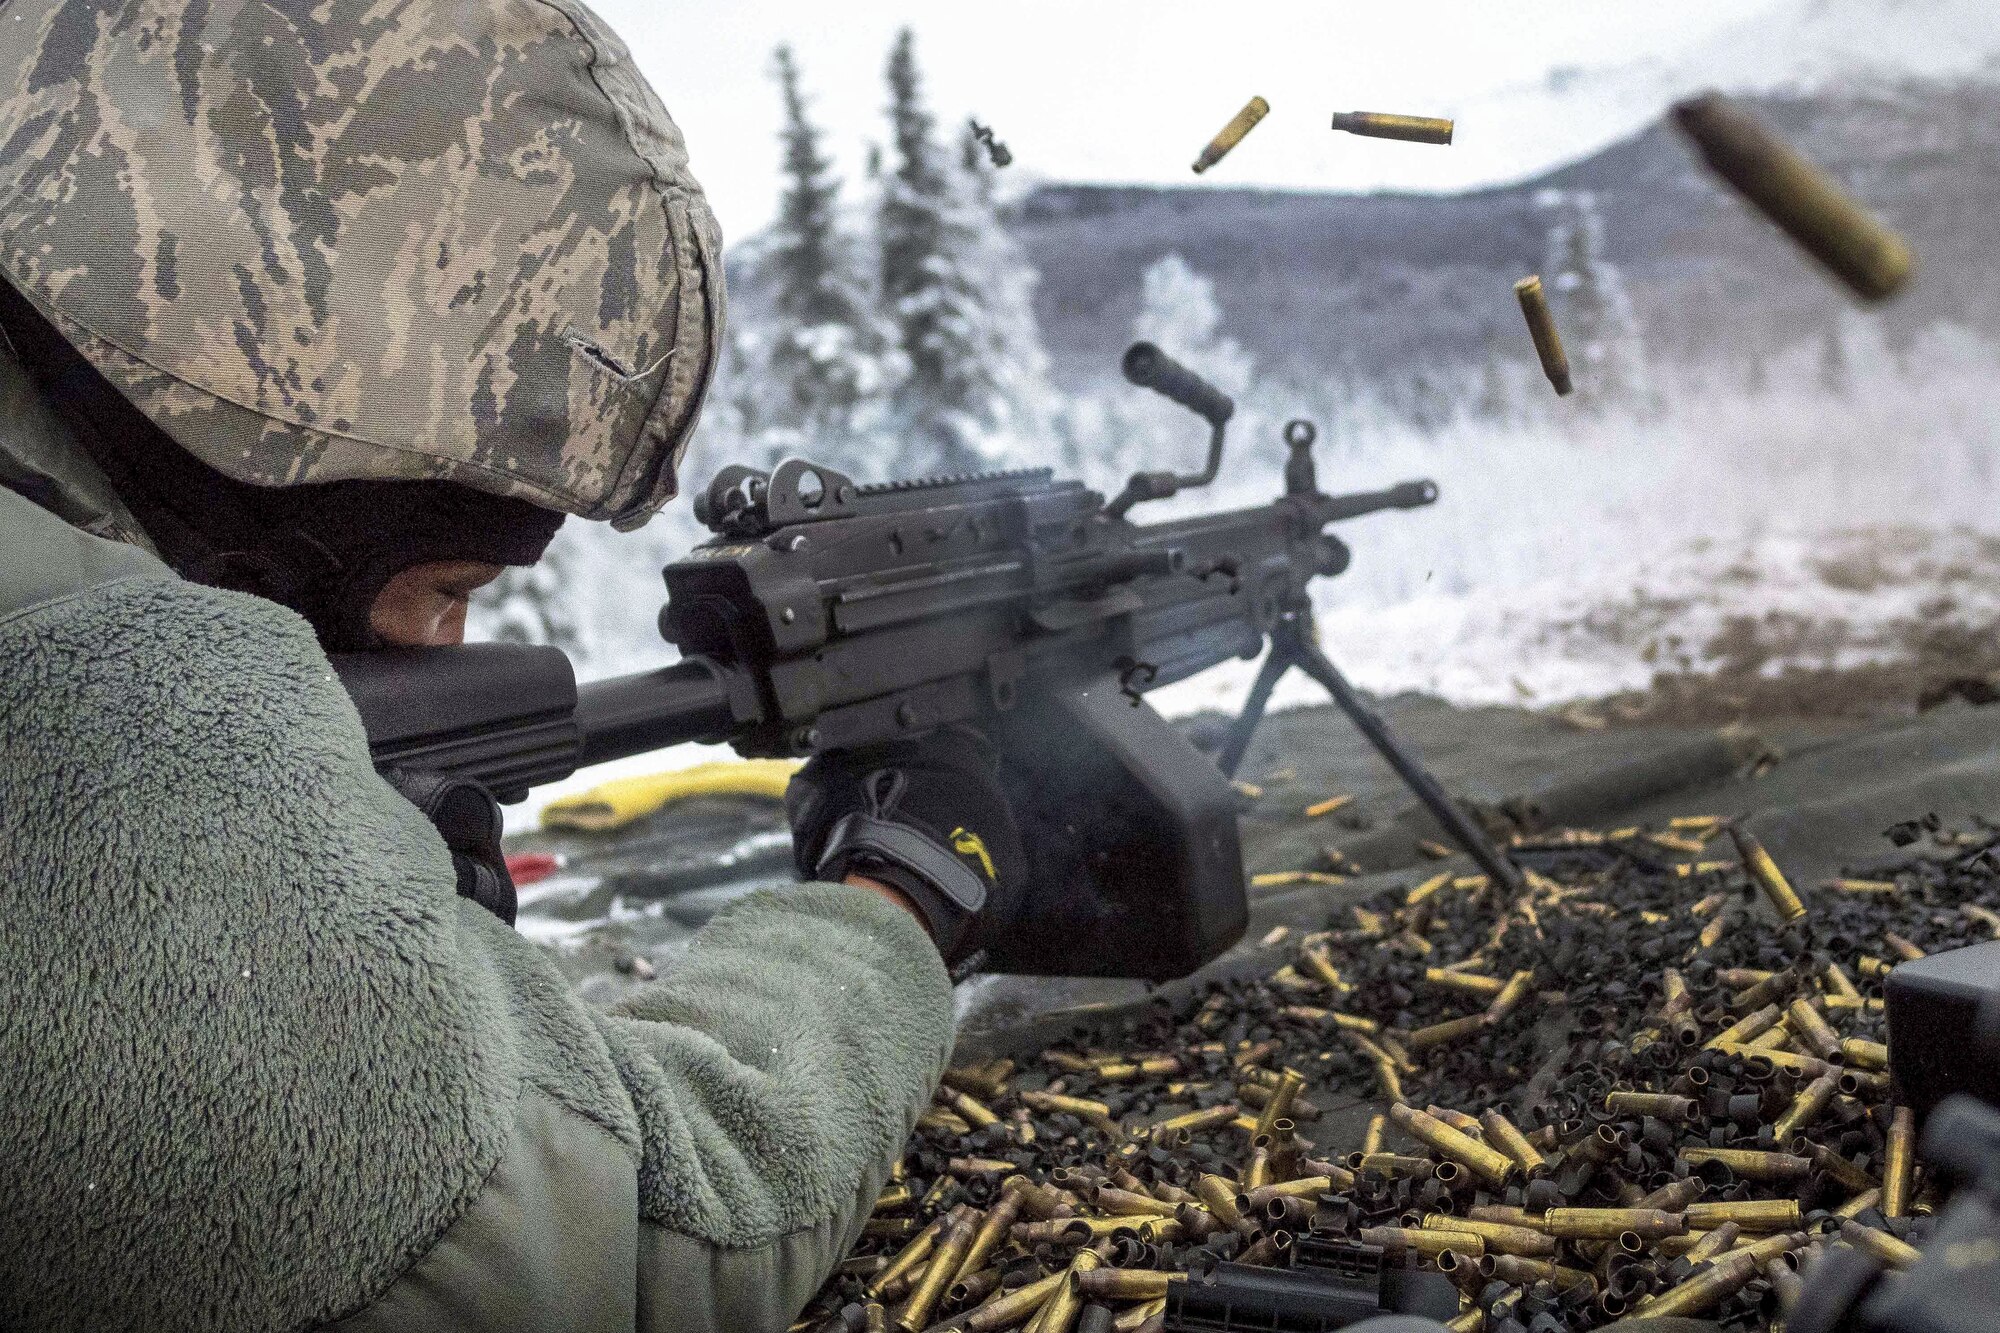 Airman 1st Class Kaylon Thomas fires at a target with an M249 squad automatic weapon during a machine gun qualification at Joint Base Elmendorf-Richardson, Alaska, Jan. 10, 2018. Thomas is a security forces officer assigned to the 673rd Security Forces Squadron. (U.S. Air Force photo by Justin Connaher)